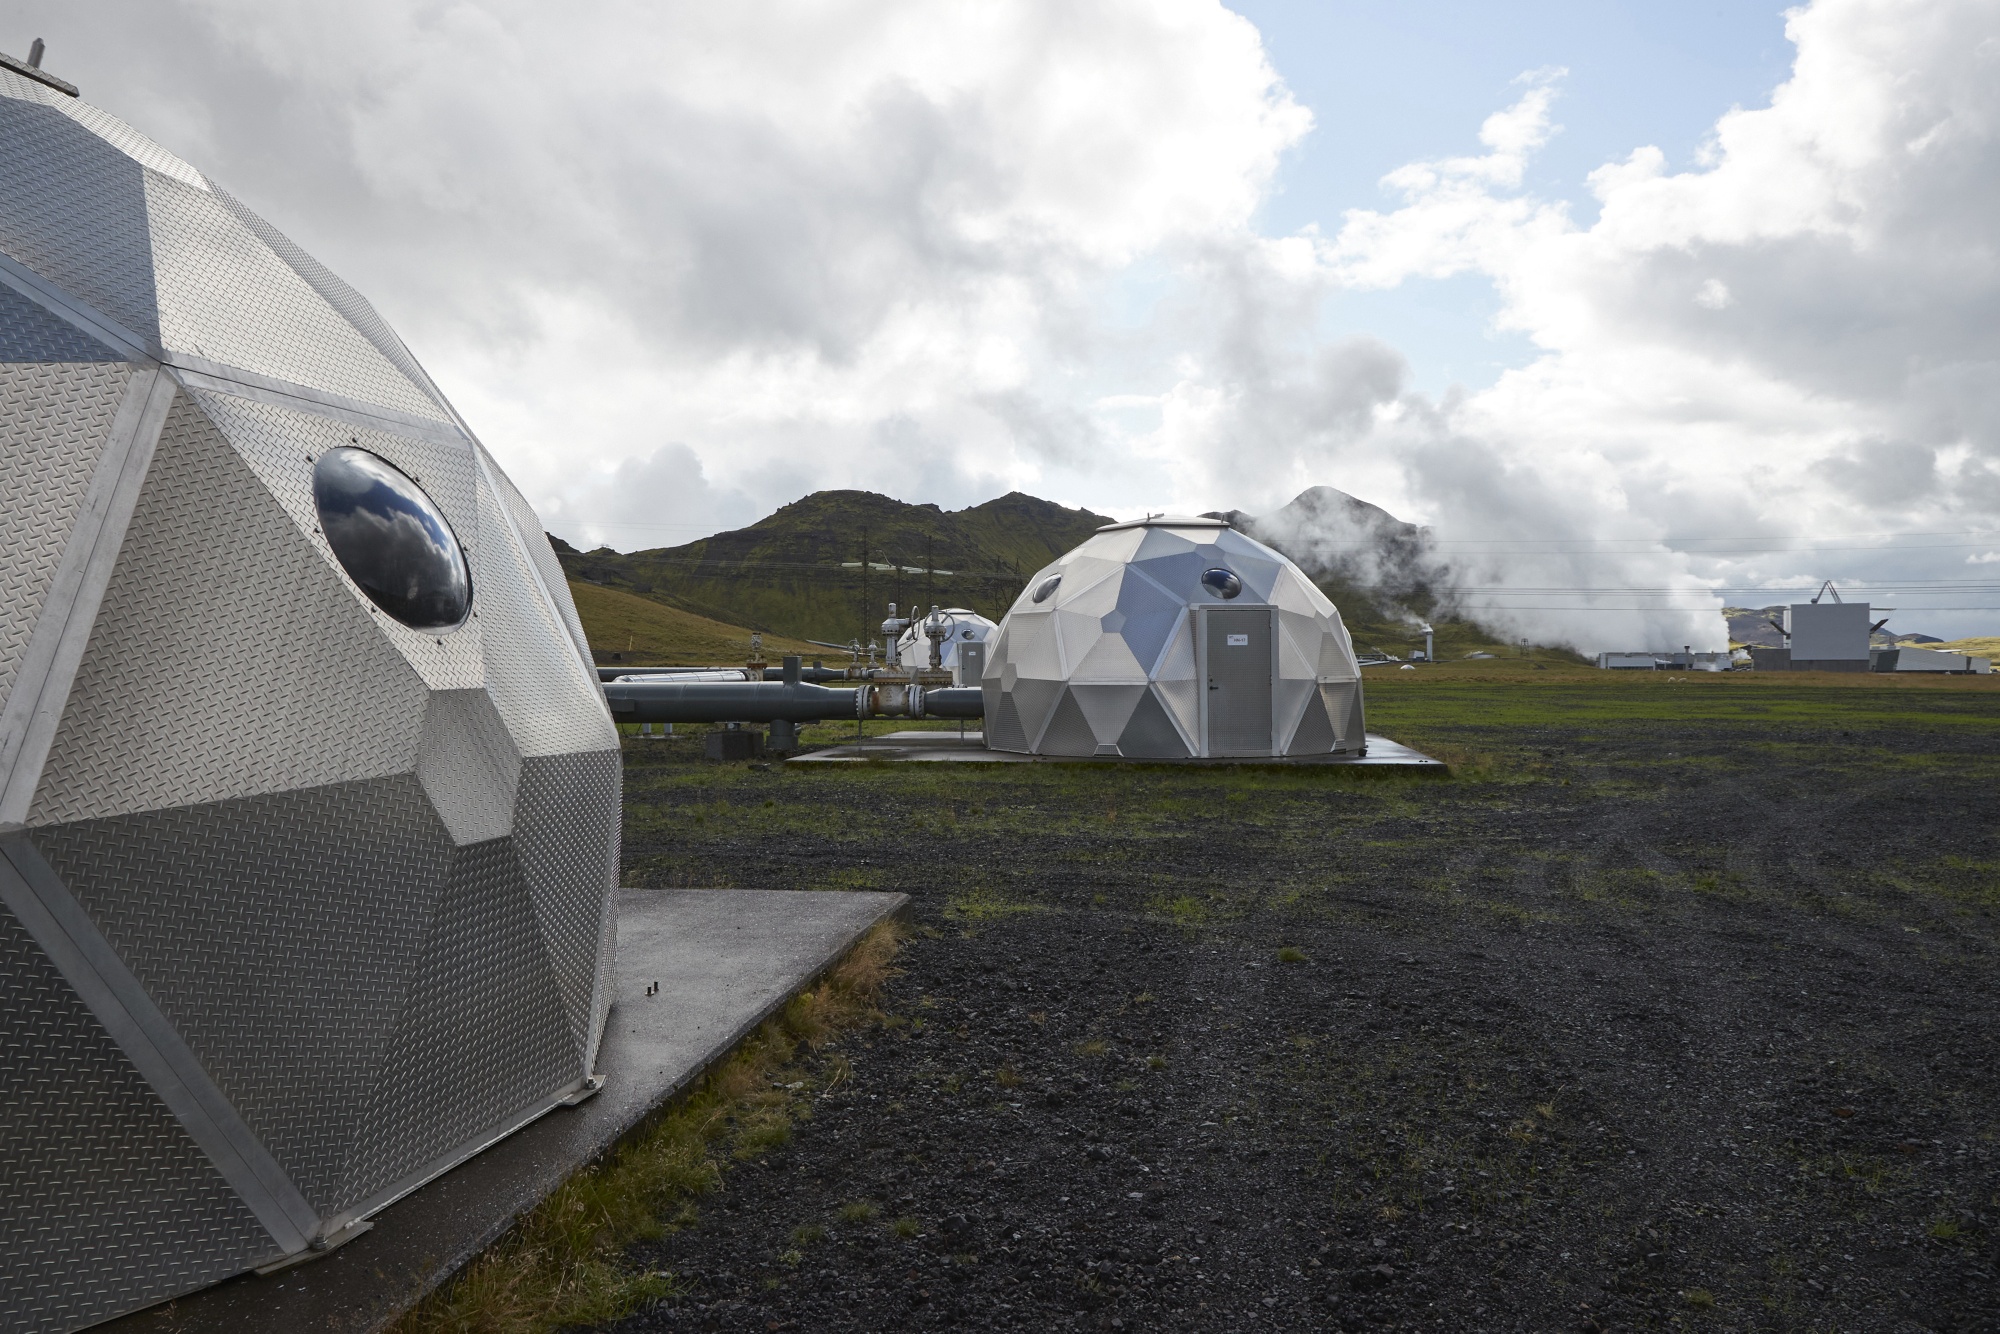 Pods, operated by Carbfix, containing technology for storing carbon dioxide underground, in Hellisheidi, Iceland.